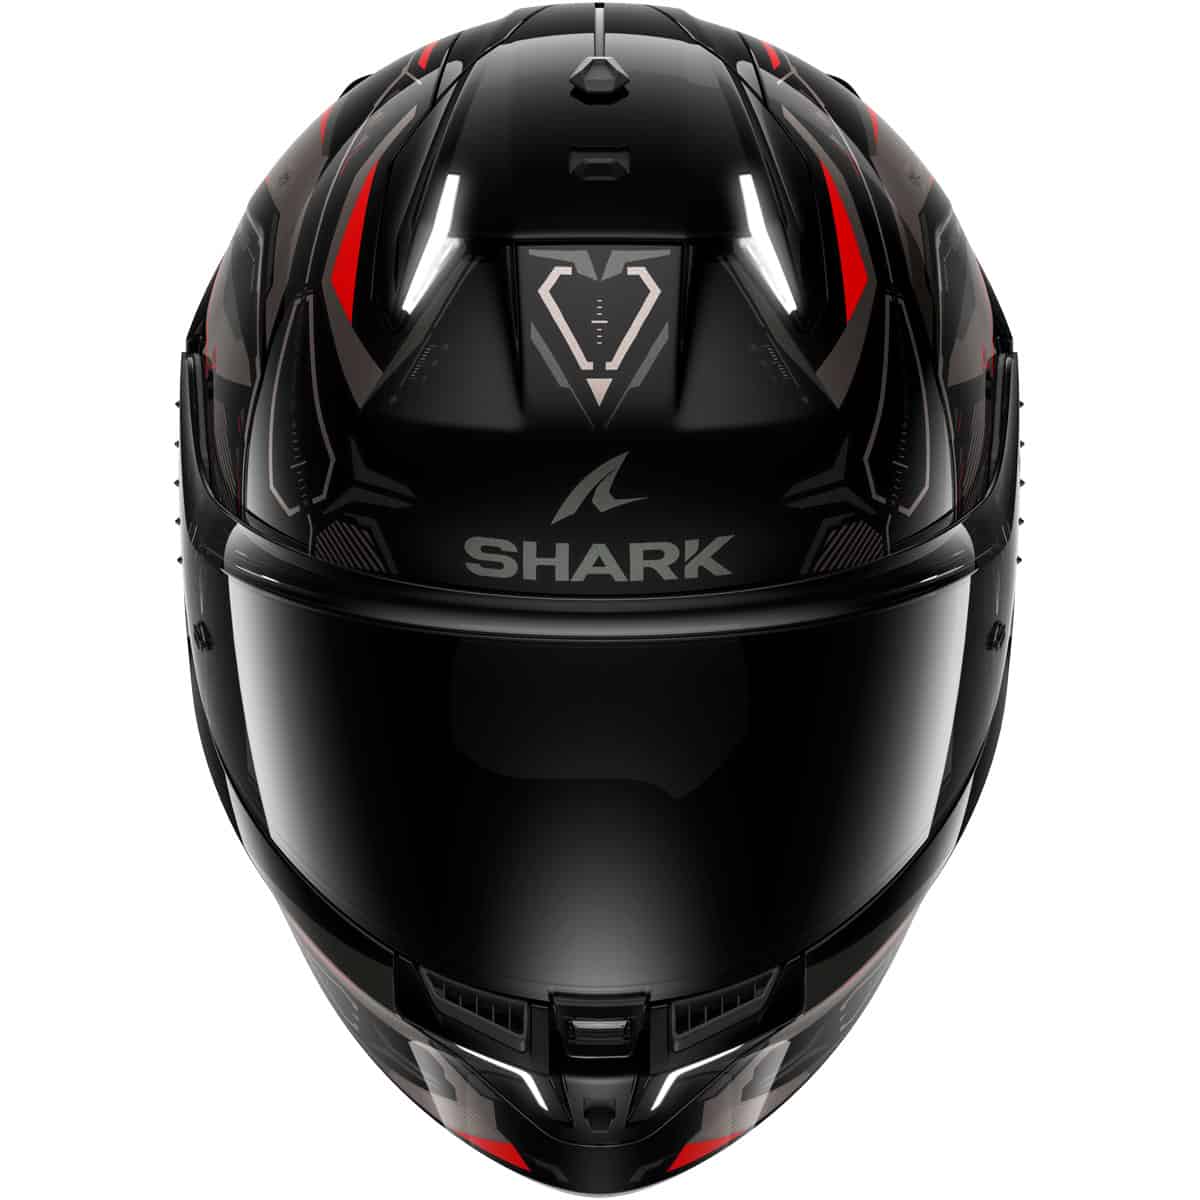 The Shark Skwal i3 helmet provides exceptional comfort, including features such as a Pinlock-equipped visor and adjustable interior settings, perfect for glasses wearers.  4